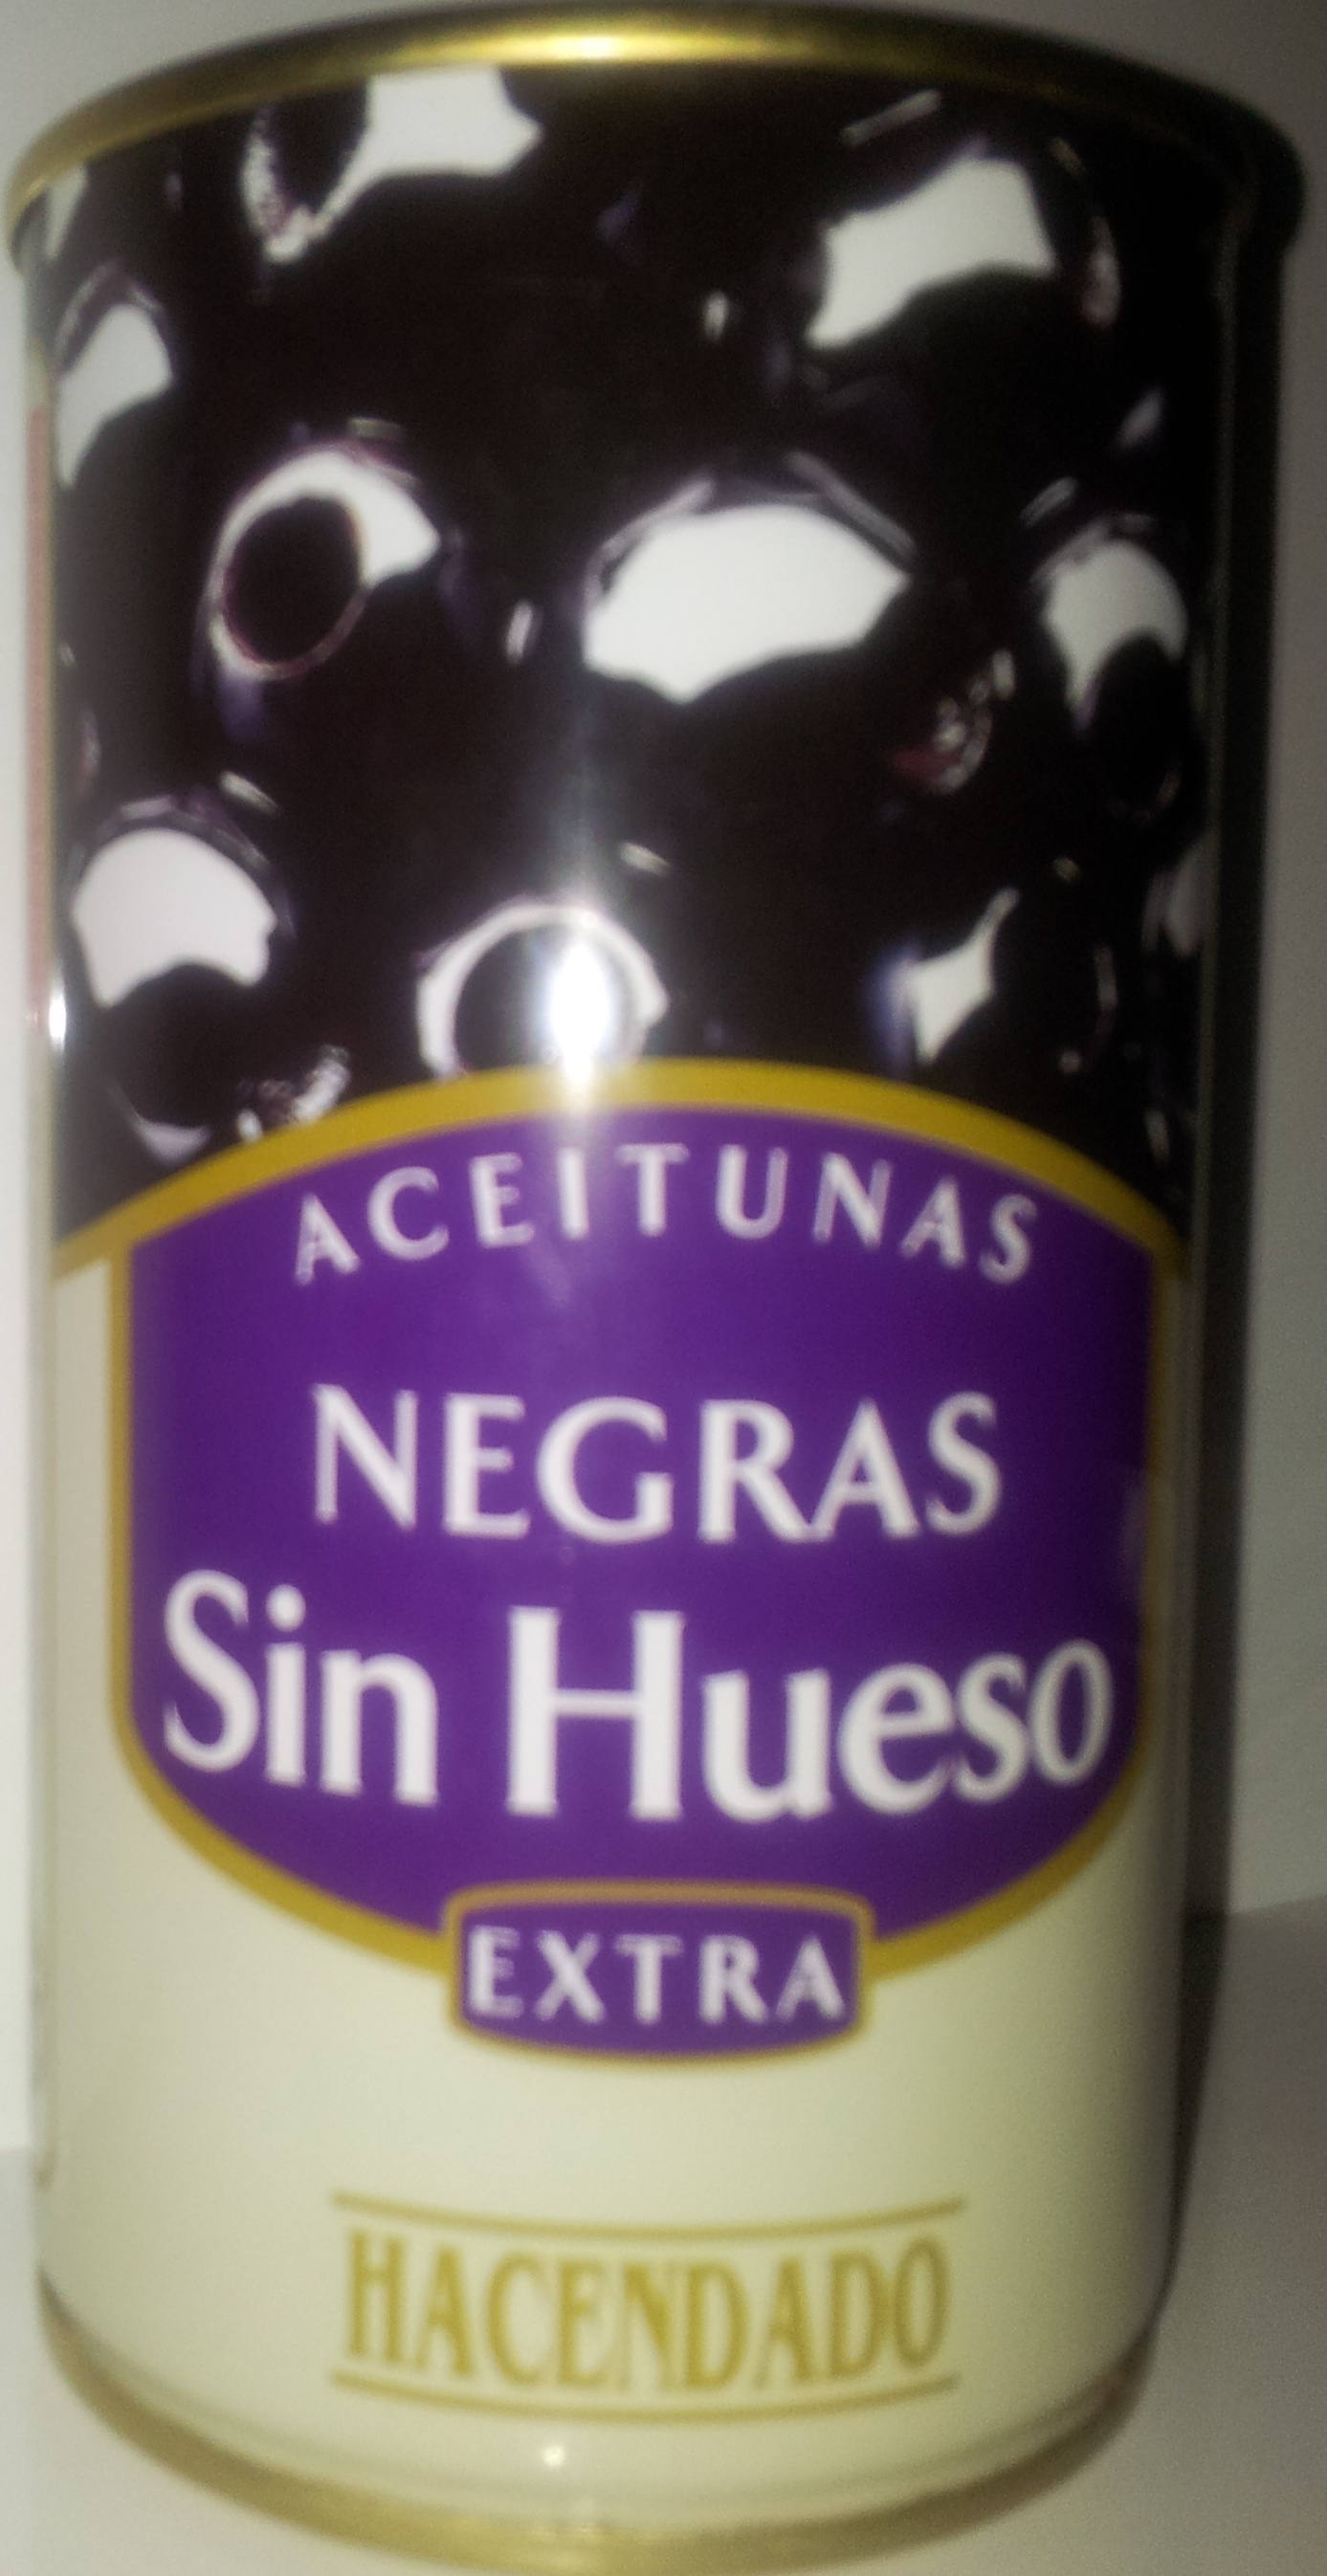 Aceitunas negras sin hueso - Product - es